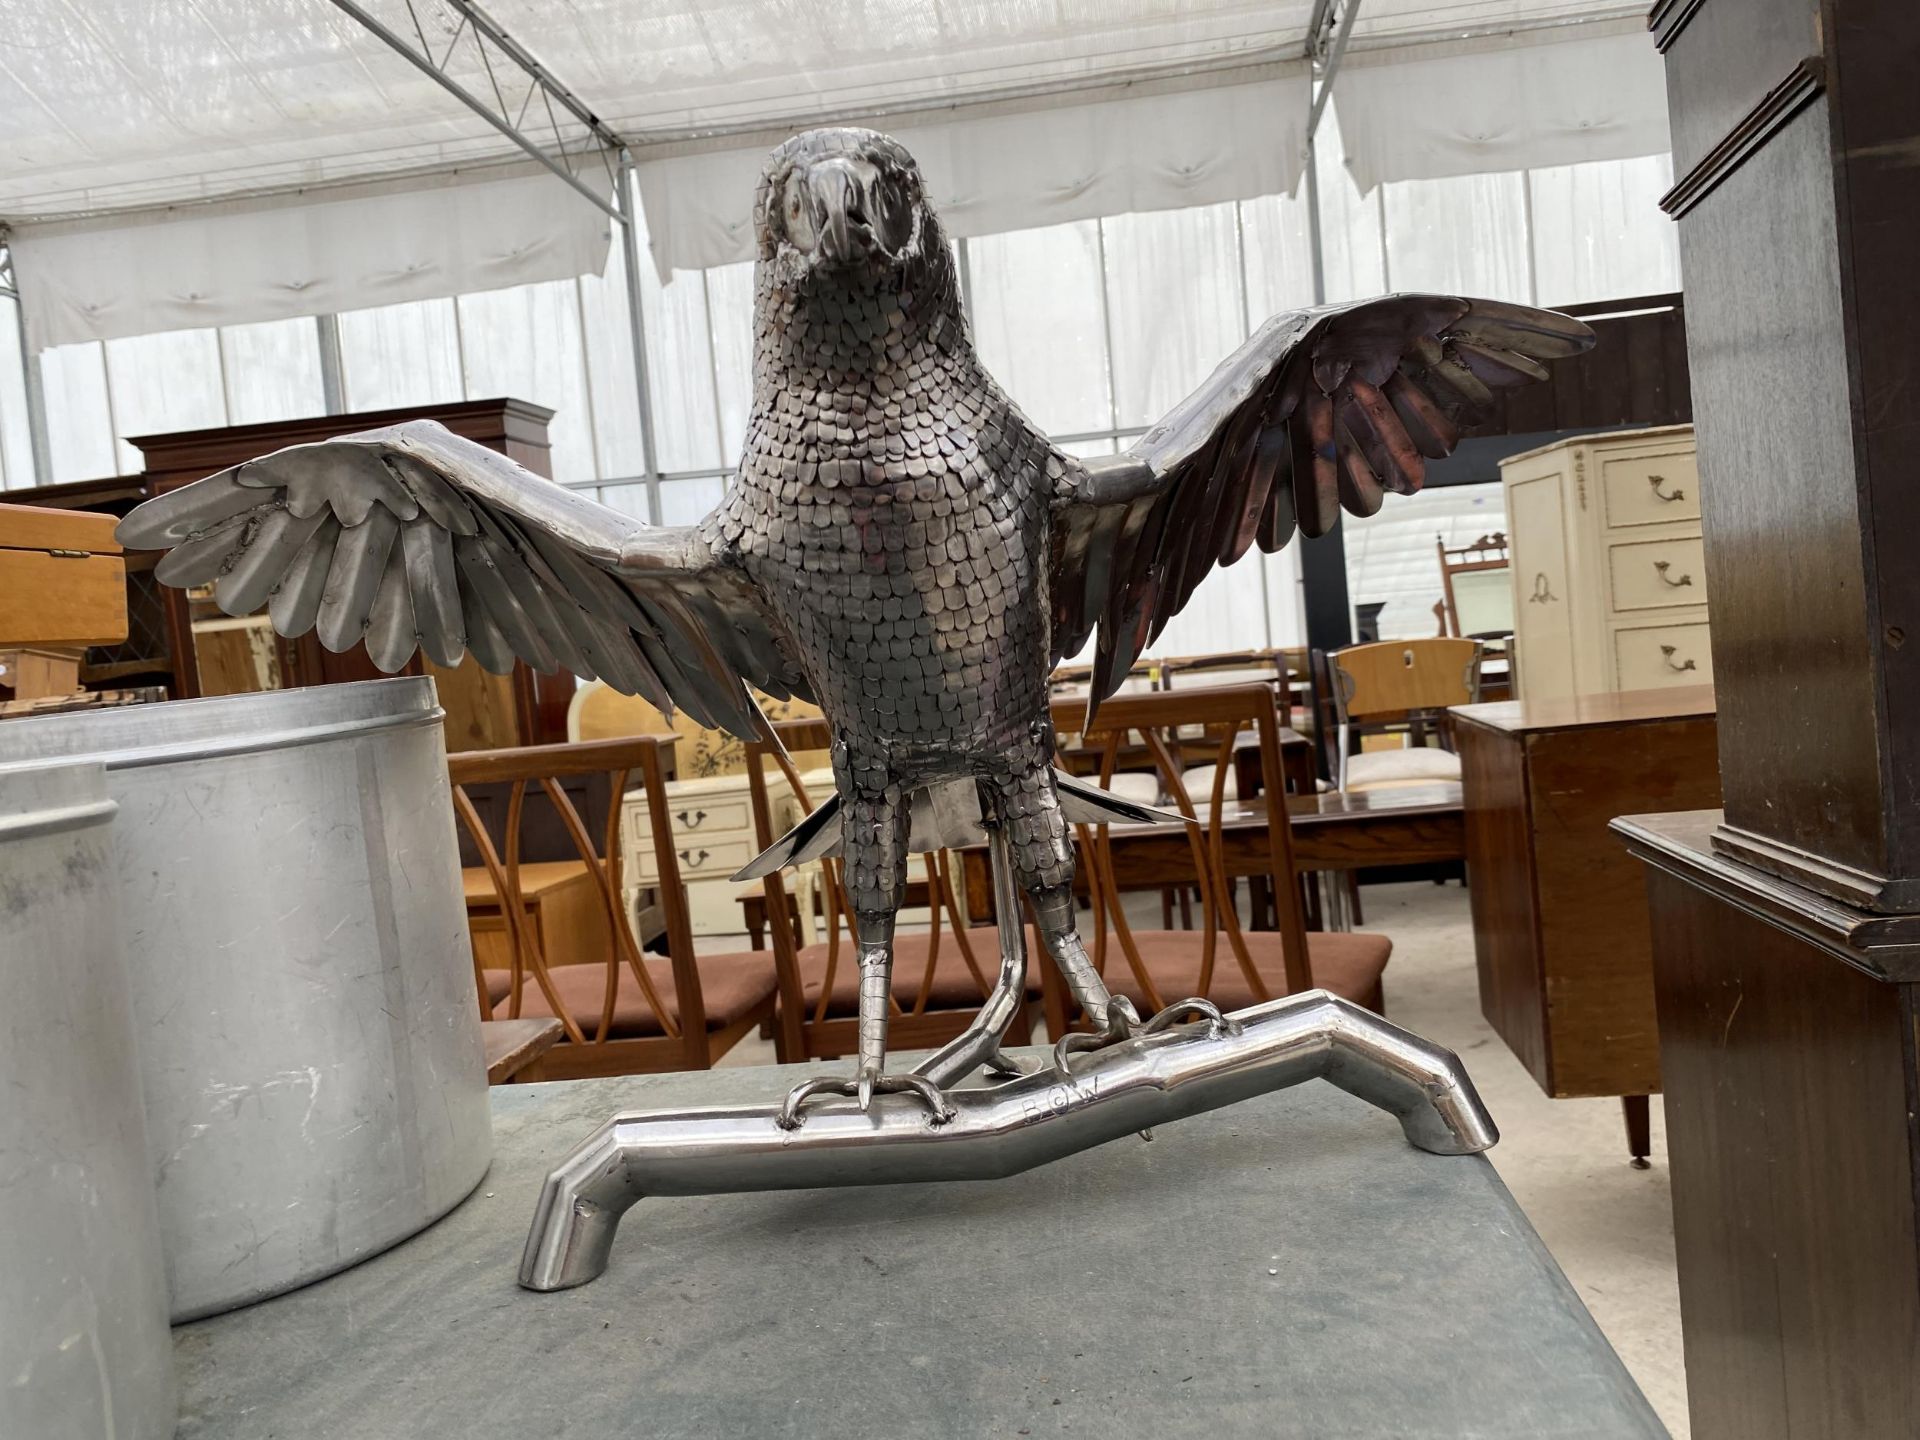 A STAINLESS STEEL EAGLE WITH WINGS SPANNED OUT